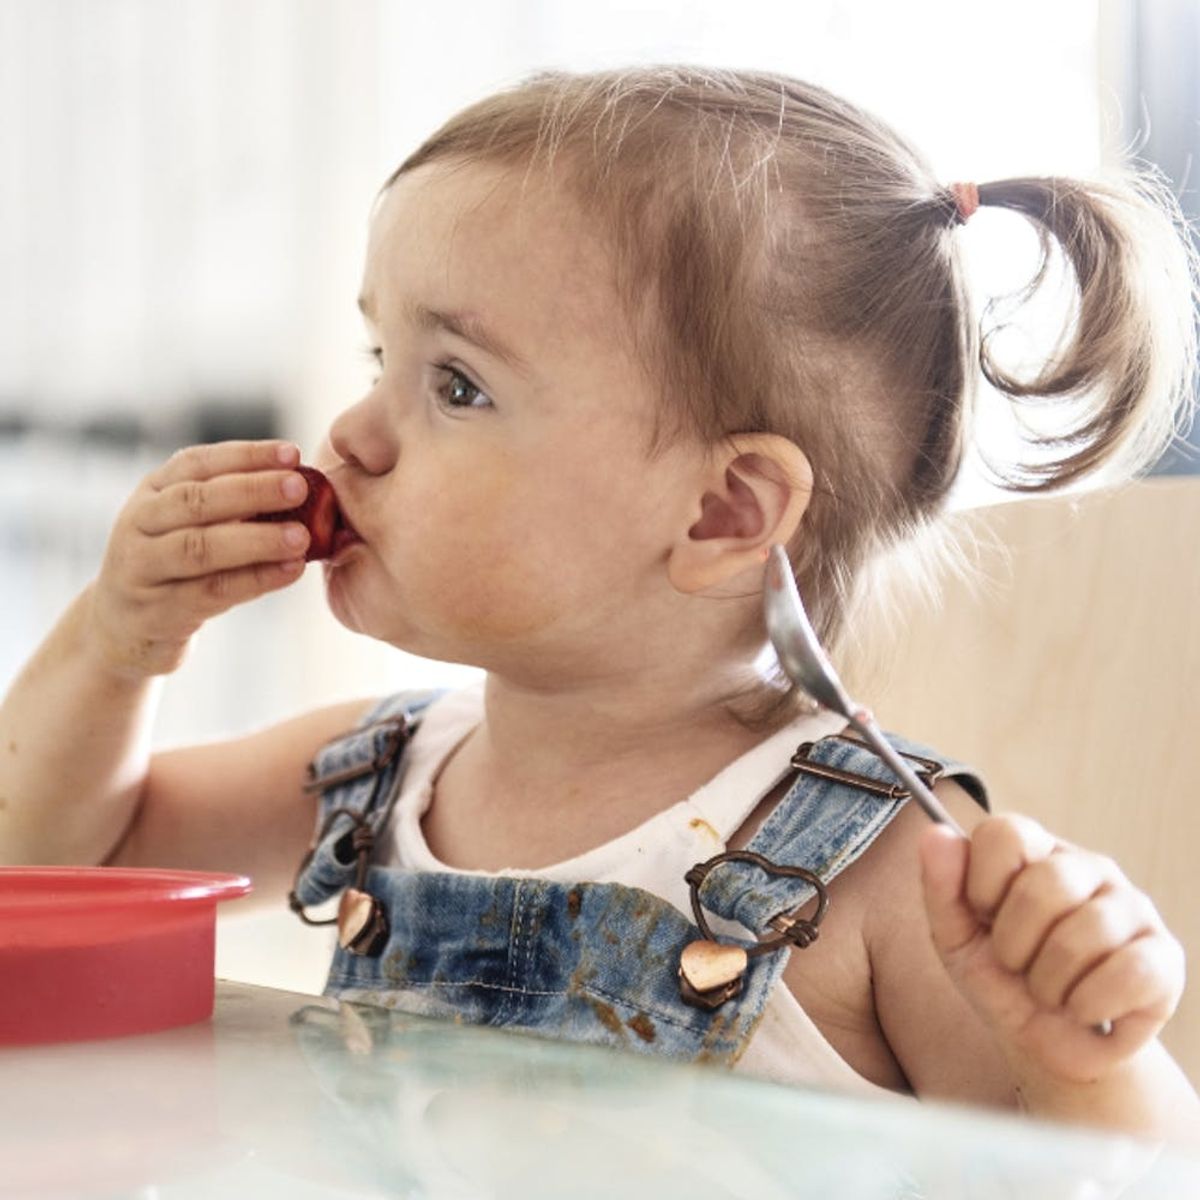 5 Easy Meals to Make for Your Toddler in 10 Minutes or Less